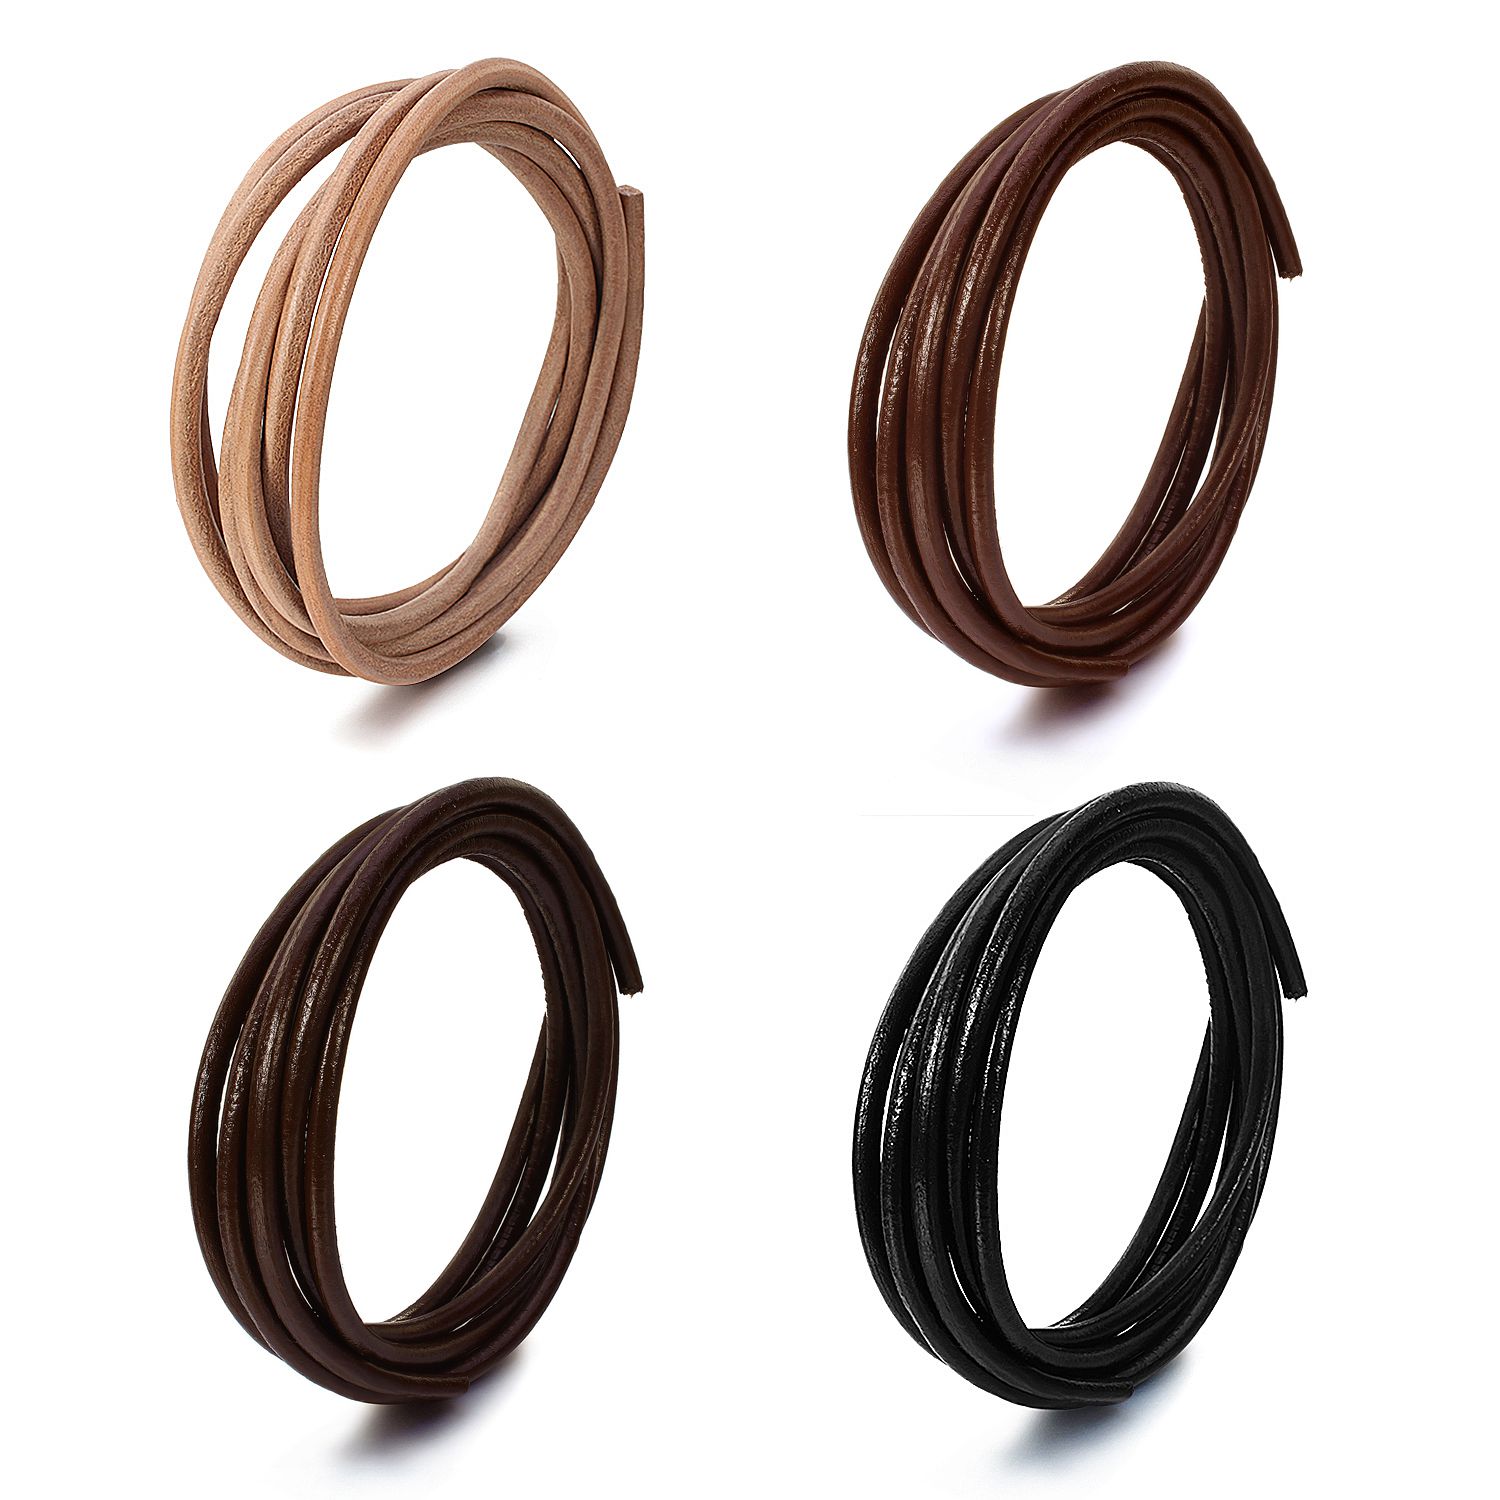 BEADNOVA 5mm Genuine Round Leather Cord Leather Strips for Jewelry ...